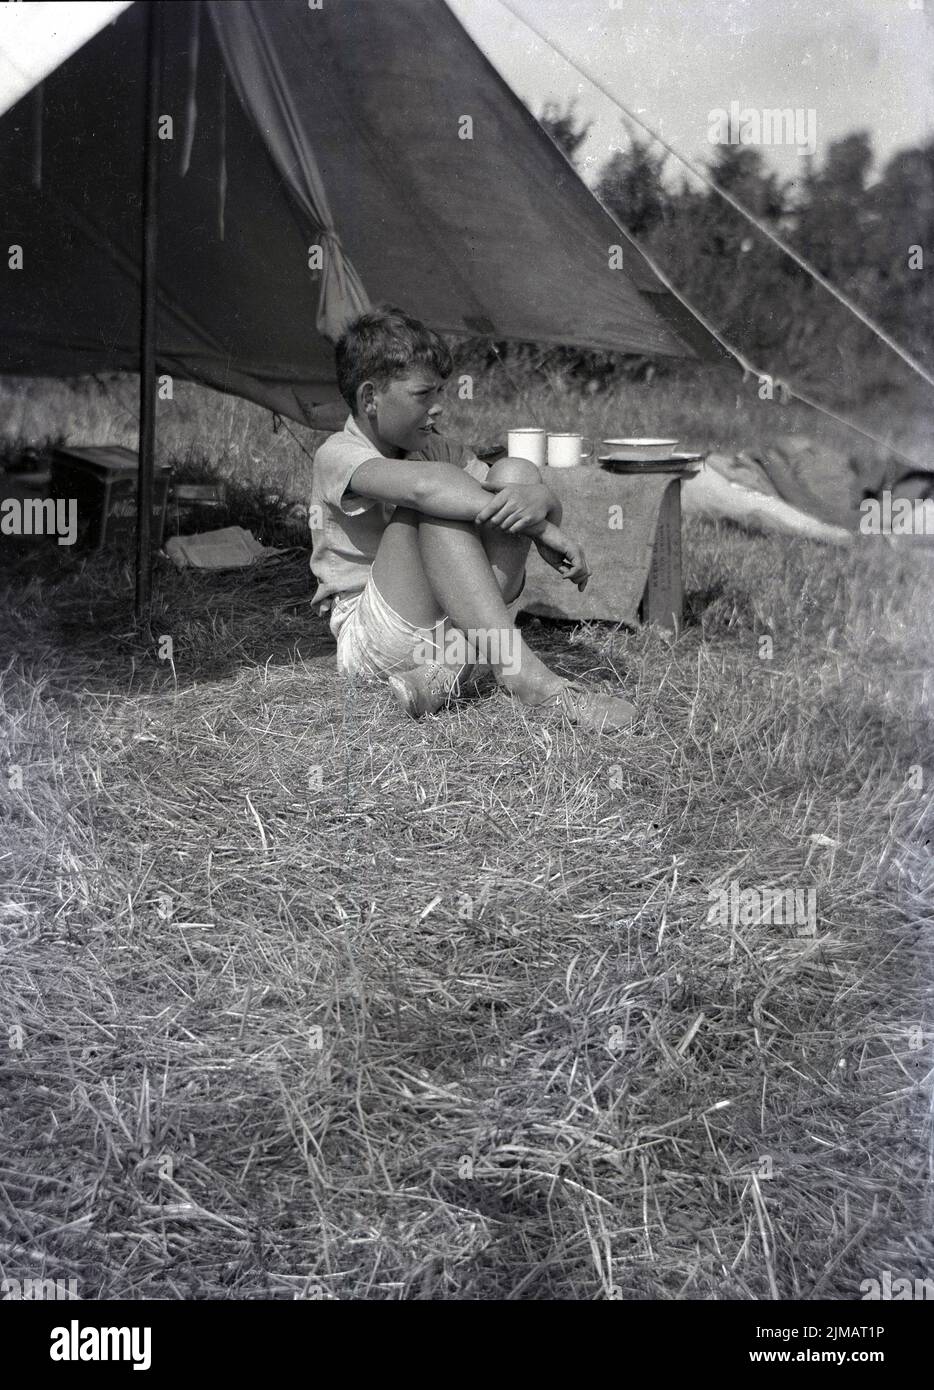 1930s, historical, summertime and a young boy sitting on the grass in a field underneath a canvas tent canopy, England, UK. Stock Photo